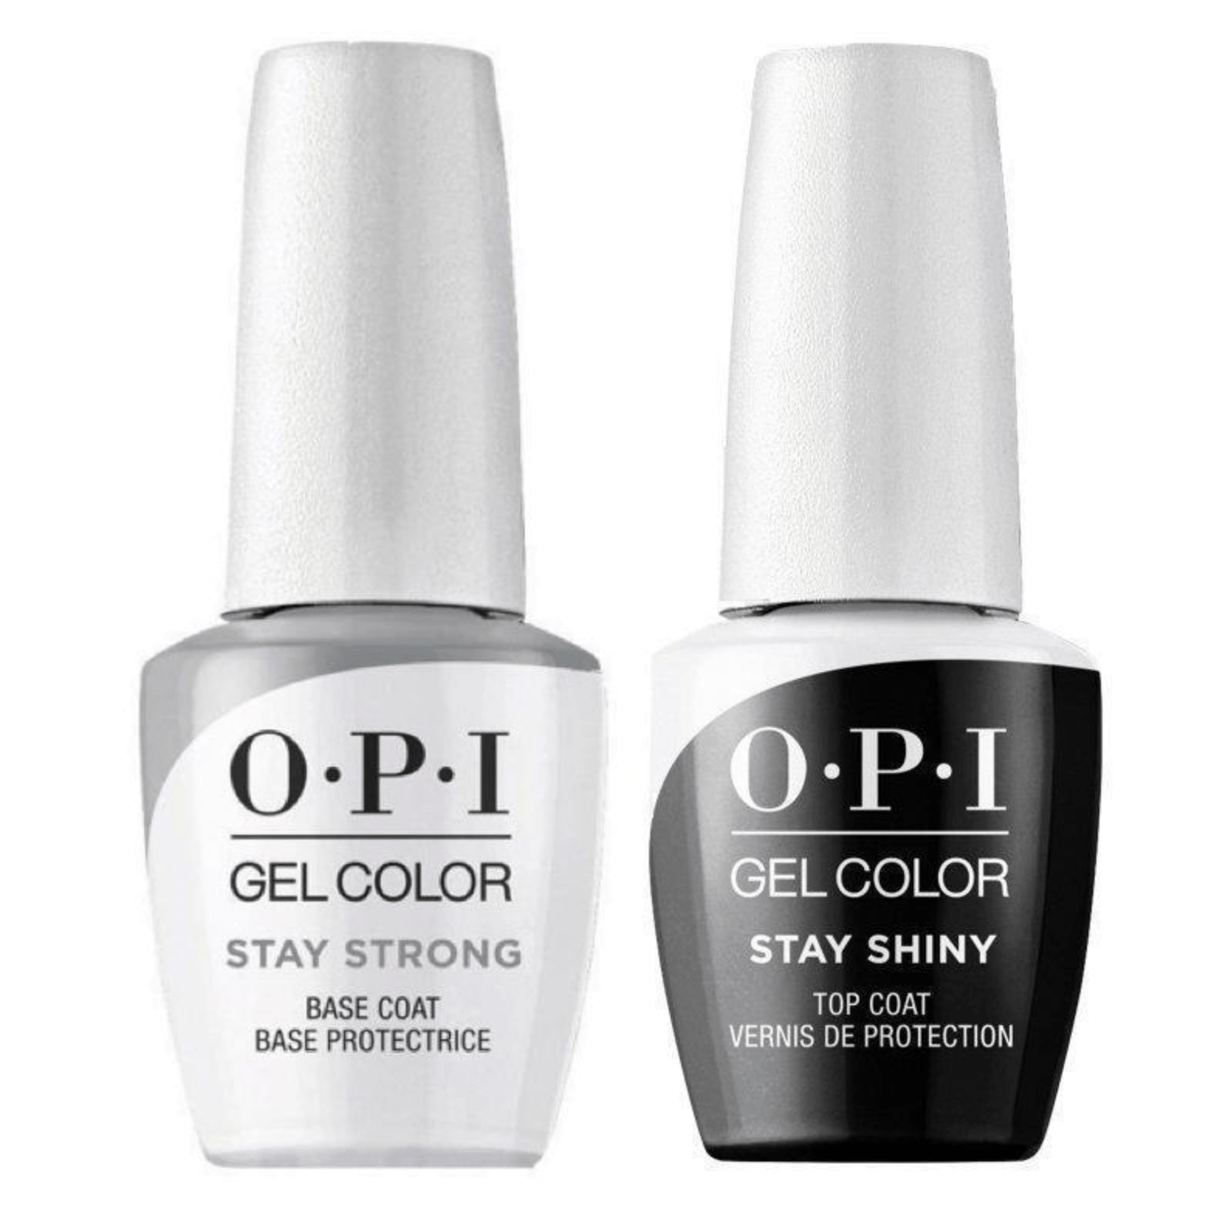 OPI Gel Color BUNDLE Stay Strong Base Coat and Stay Shiny Top Coat (GC 002 & GC 003)